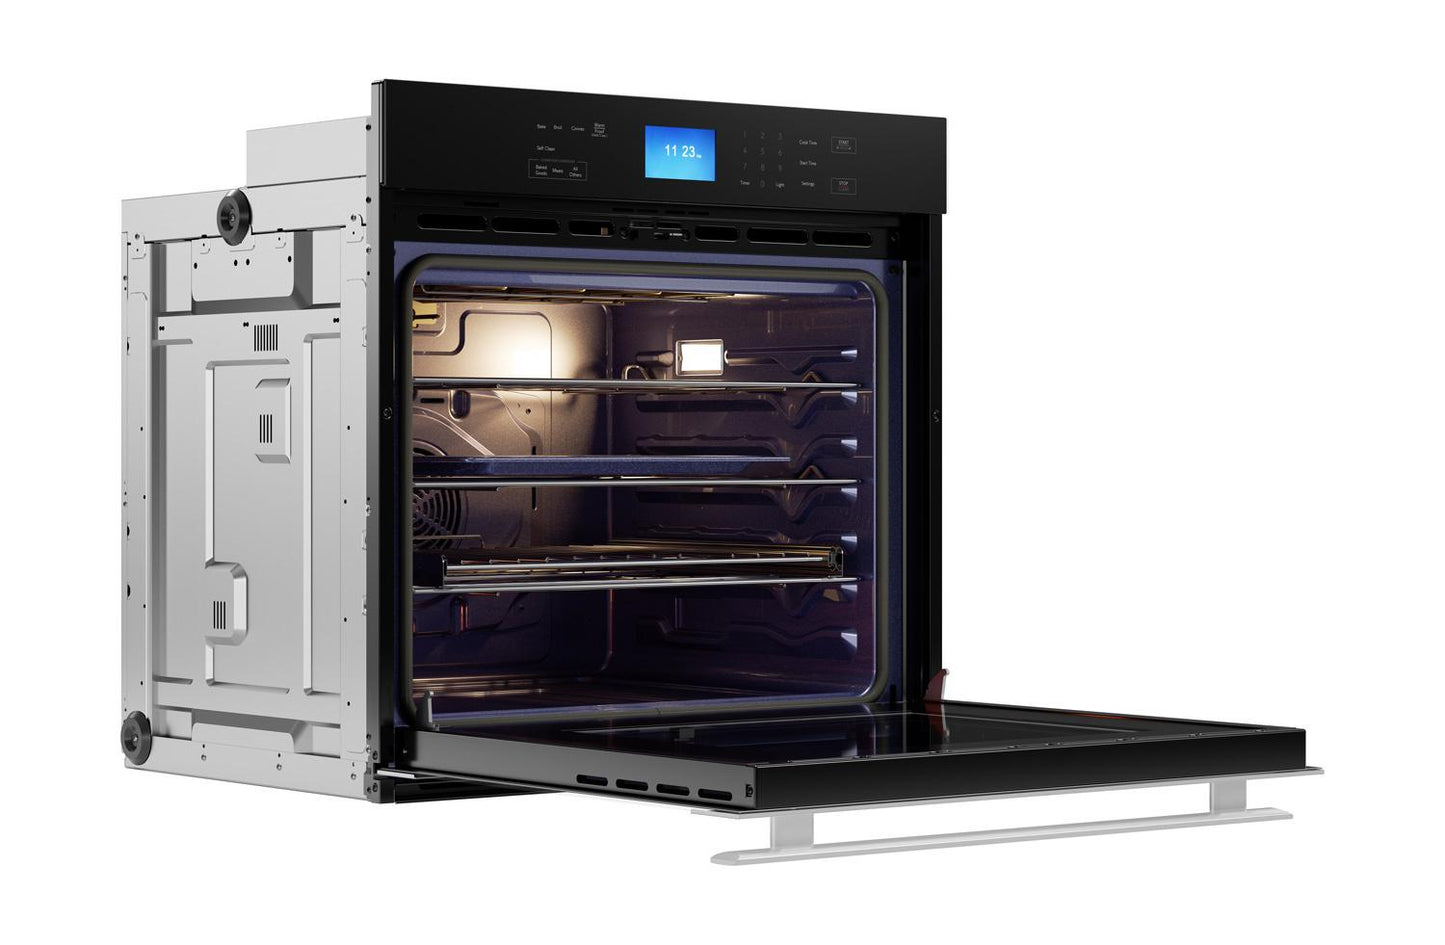 Sharp SWA3062GS Stainless Steel European Convection Built-In Single Wall Oven